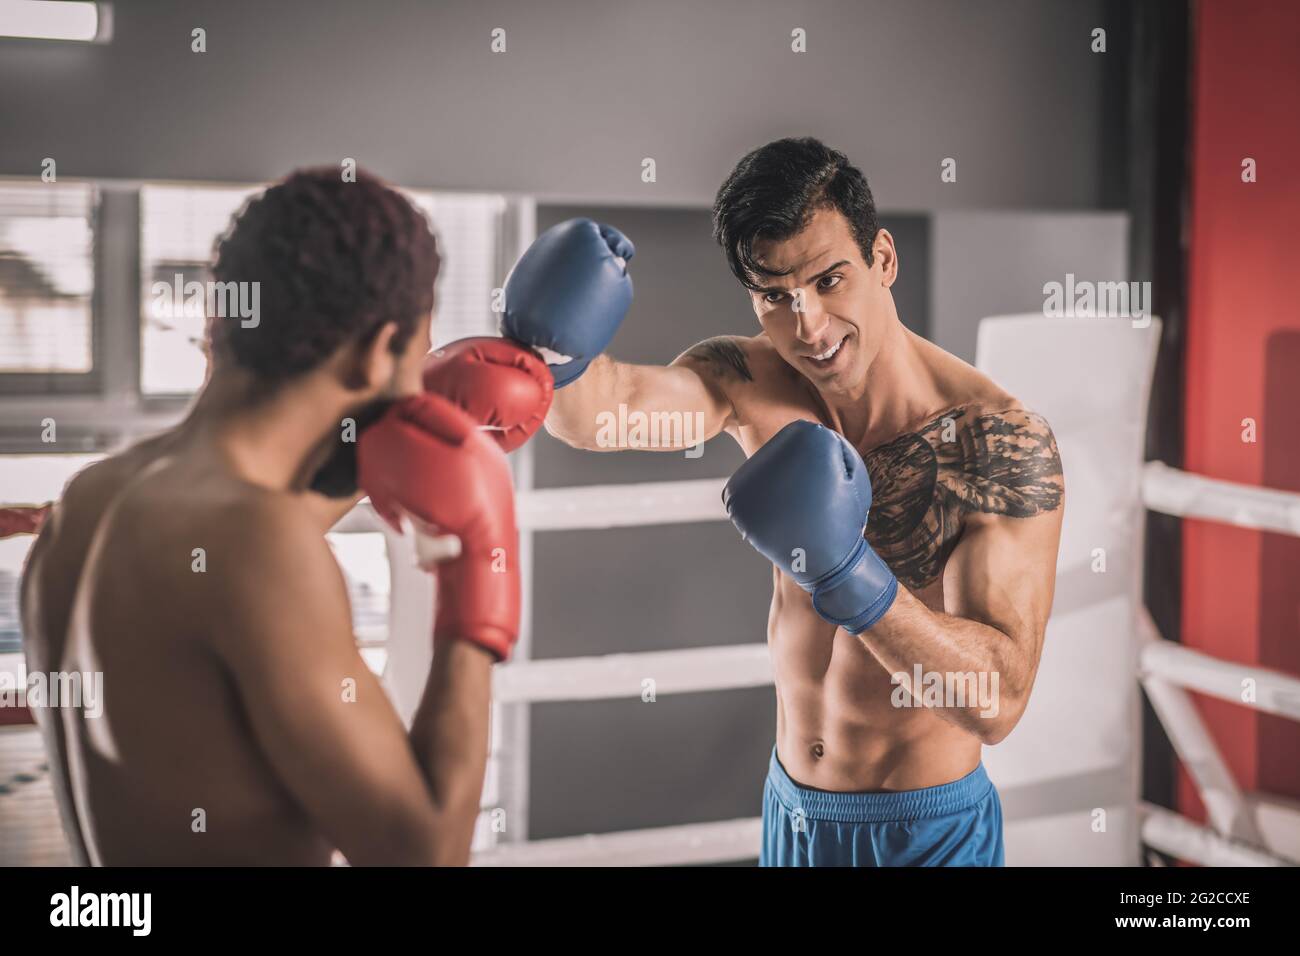 Two young kickboxers having a workout and looking involved Stock Photo